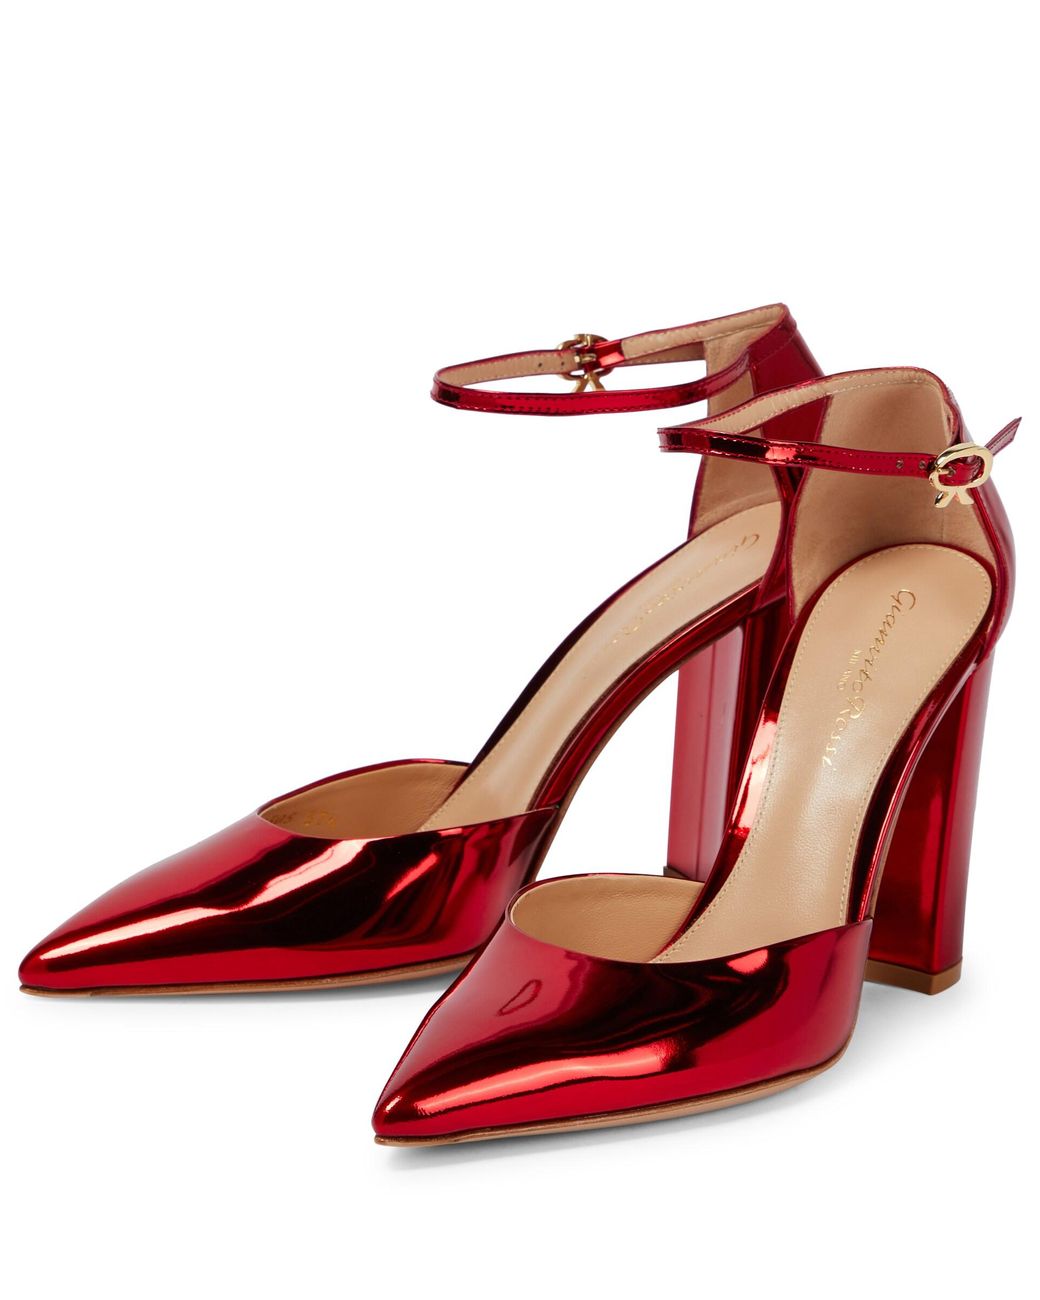 Gianvito Rossi Piper 100 Metallic Leather Pumps in Red | Lyst